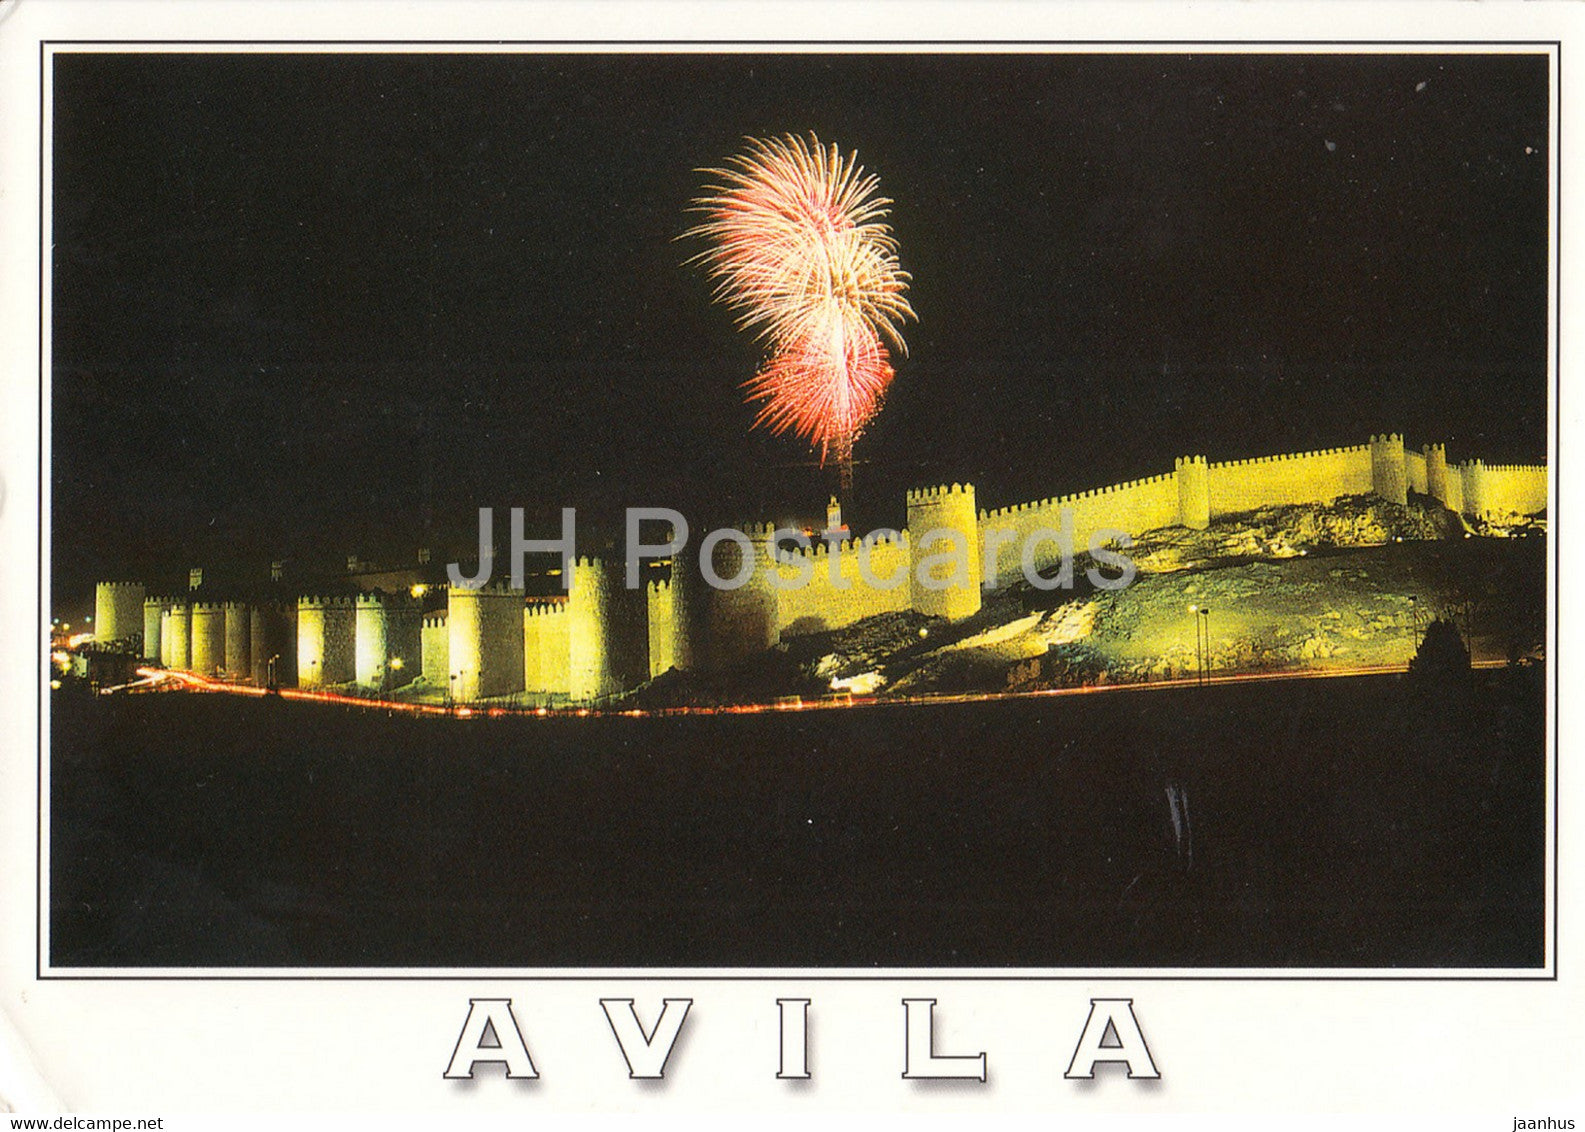 Avila - Murallas - Vista parcial nocturna - Walls - Partial Night View - fireworks - 100 - 2003 - Spain - used - JH Postcards